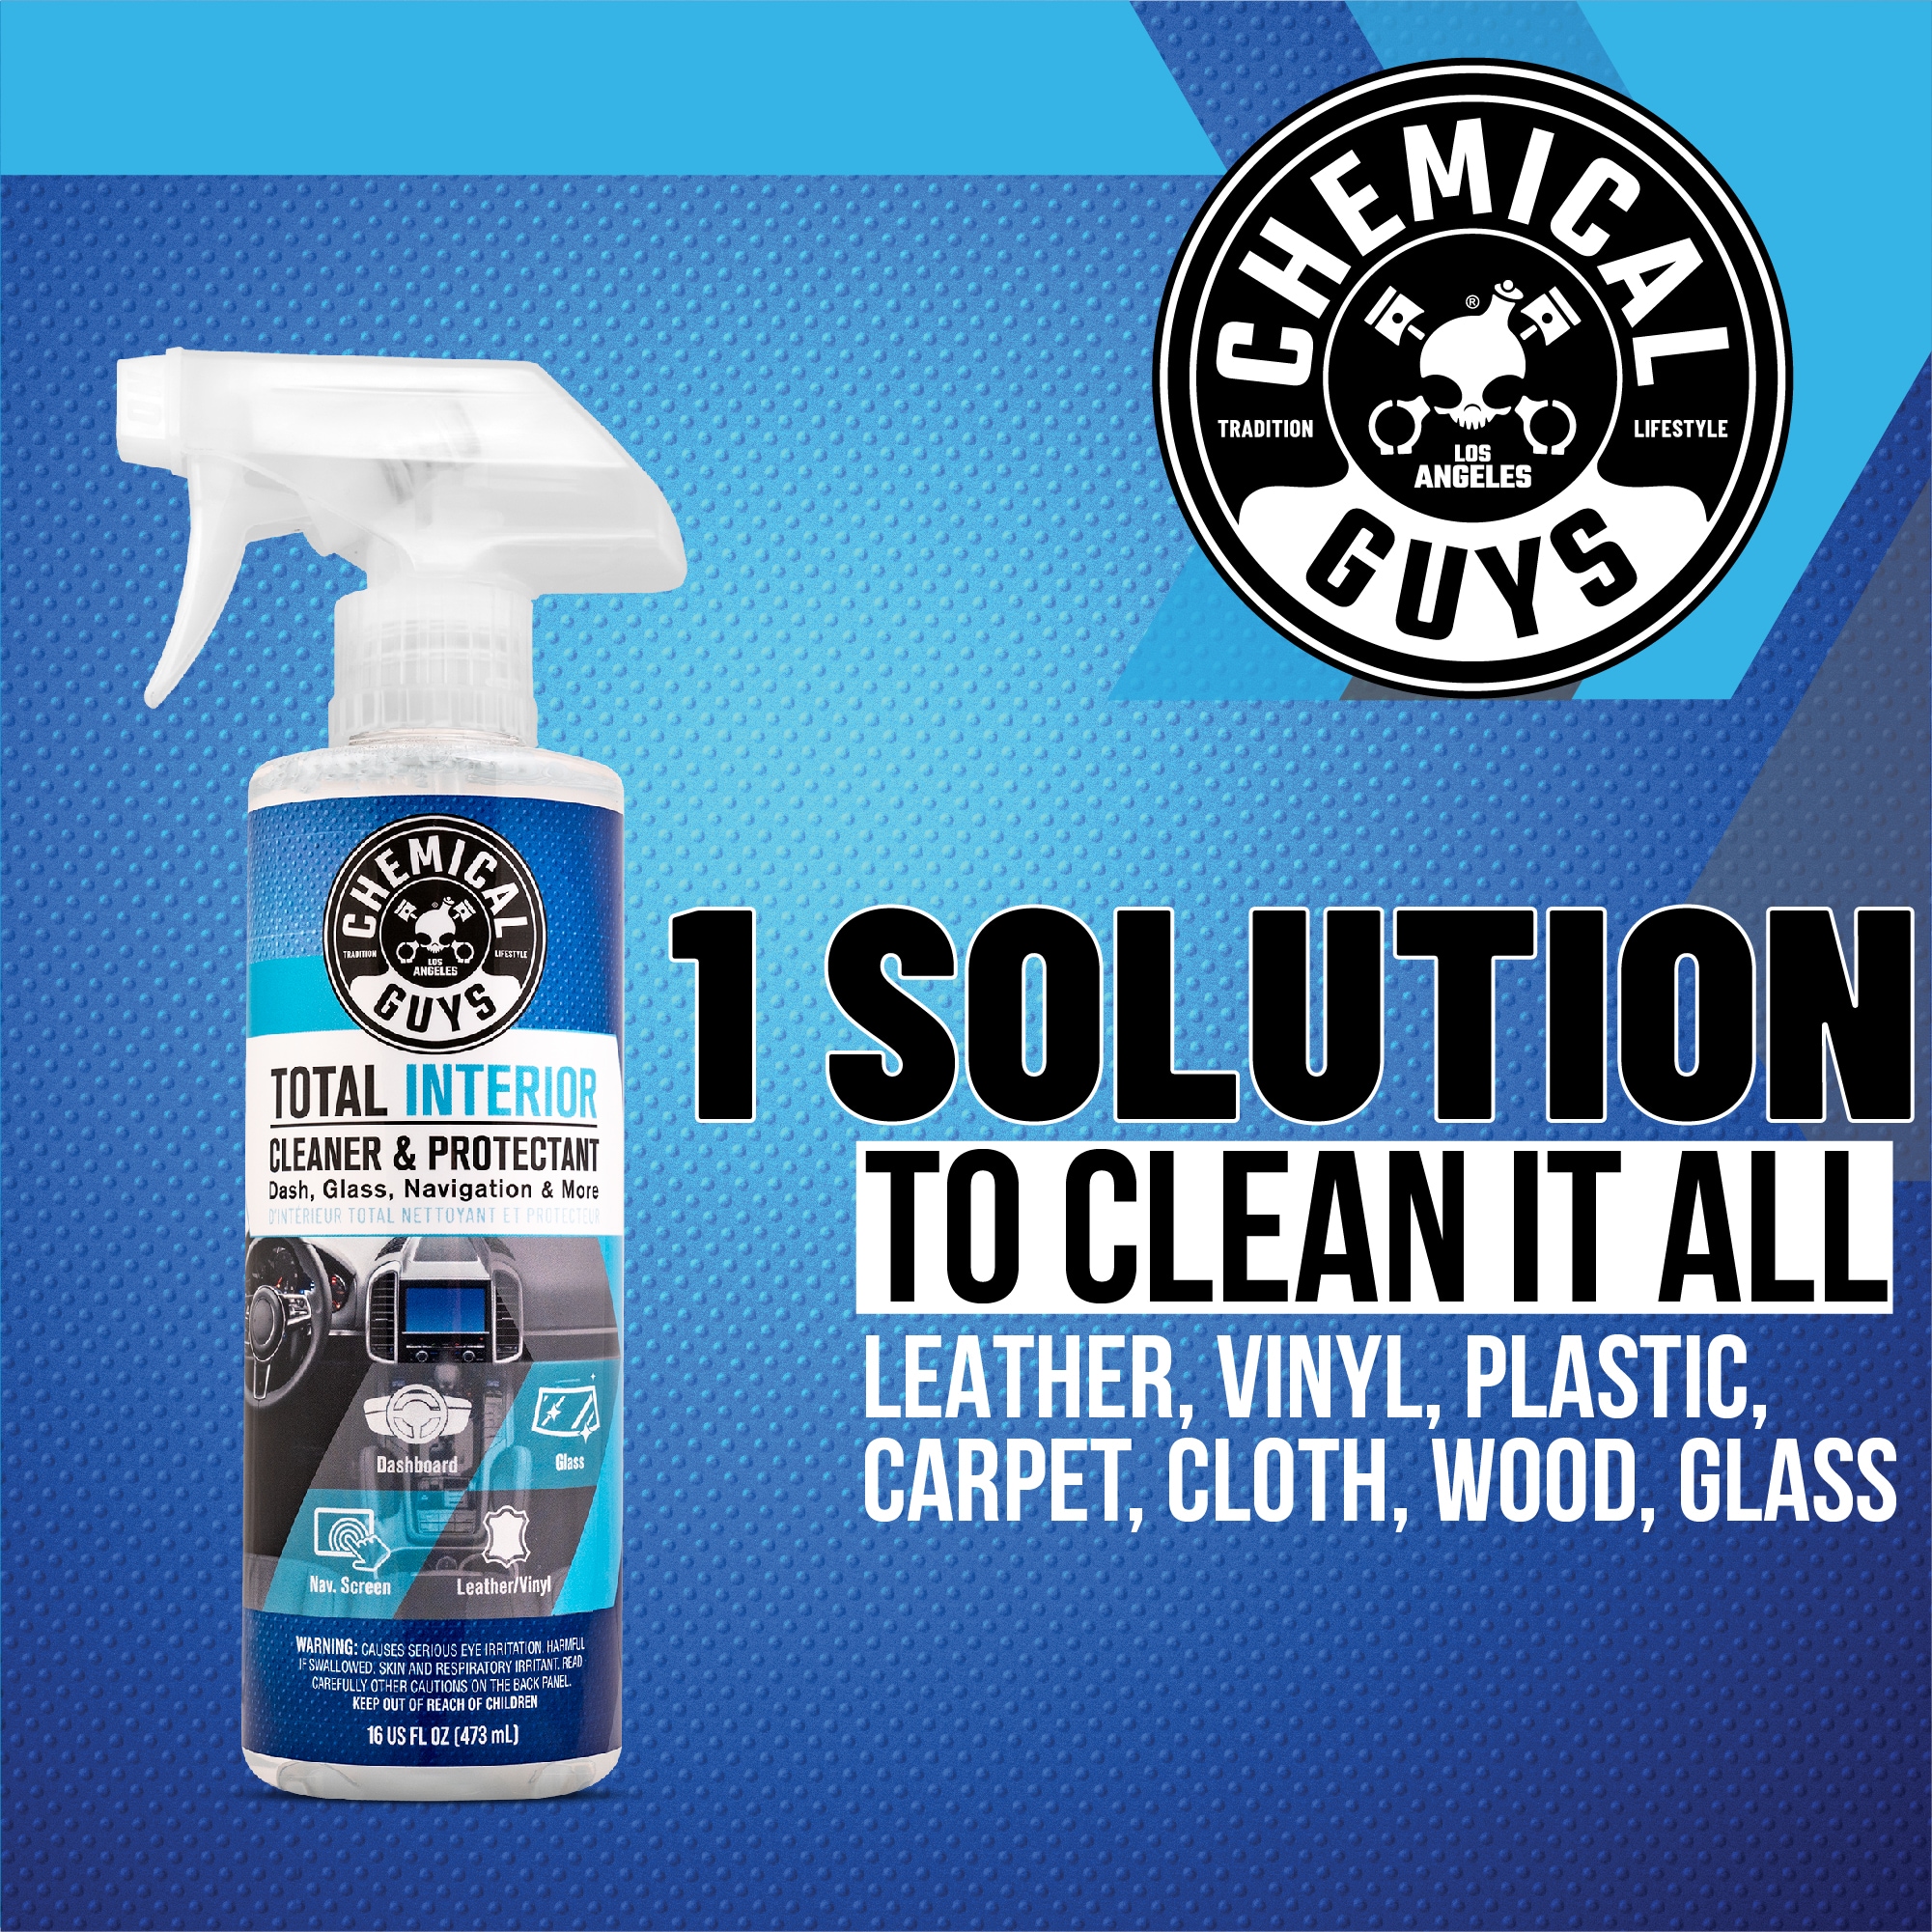 Chemical Guys HOL315 Carpet and Upholstery Cleaning Kit 16 fl oz 3 Items